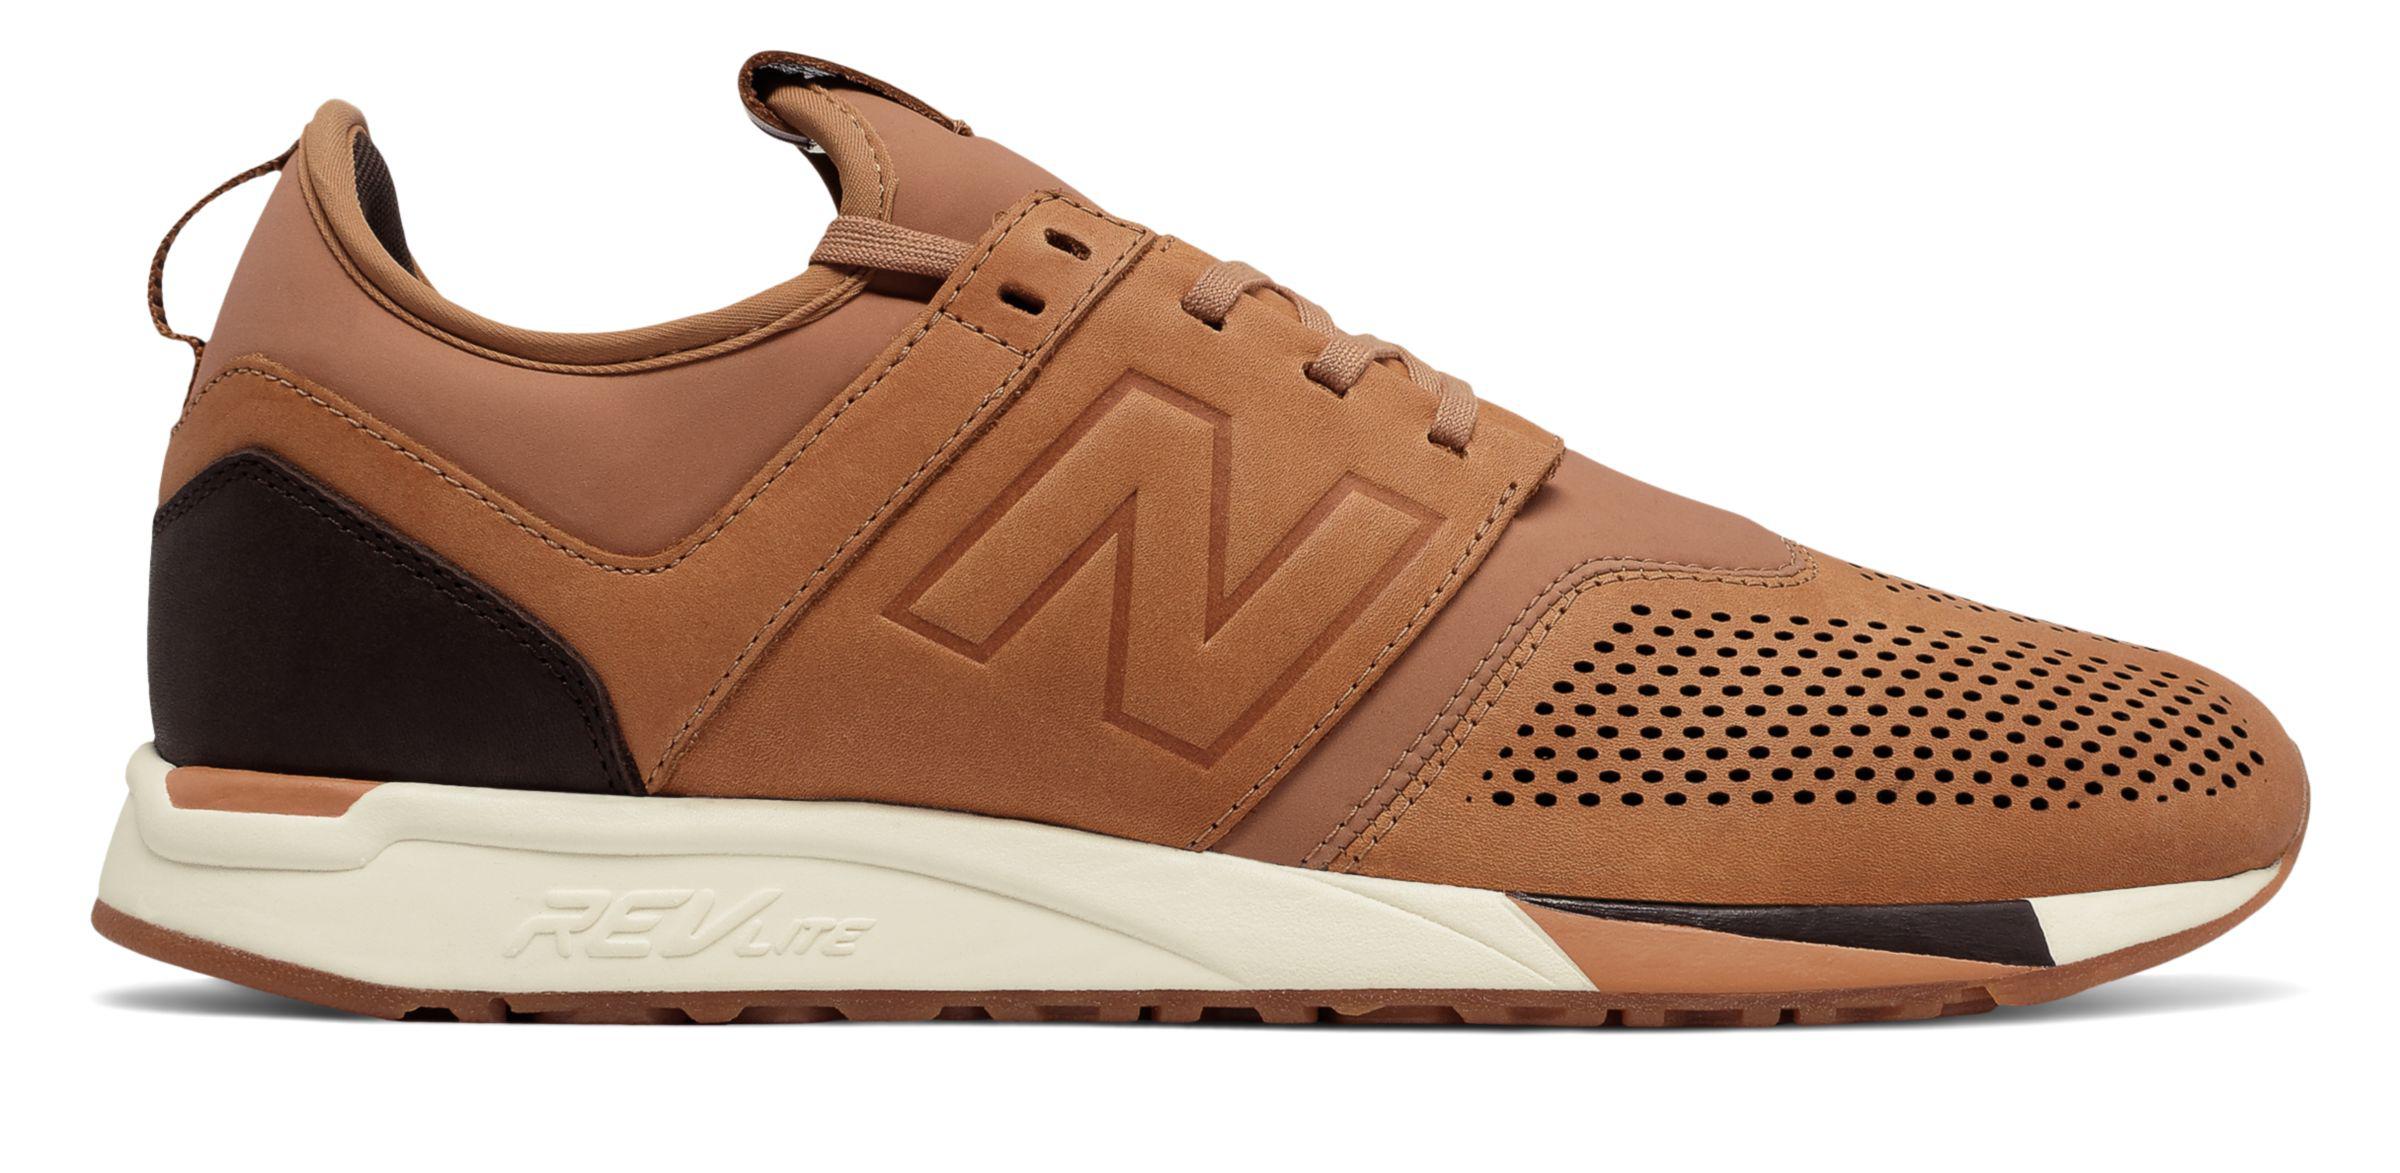 Shop > new balance 246 > at lowest prices